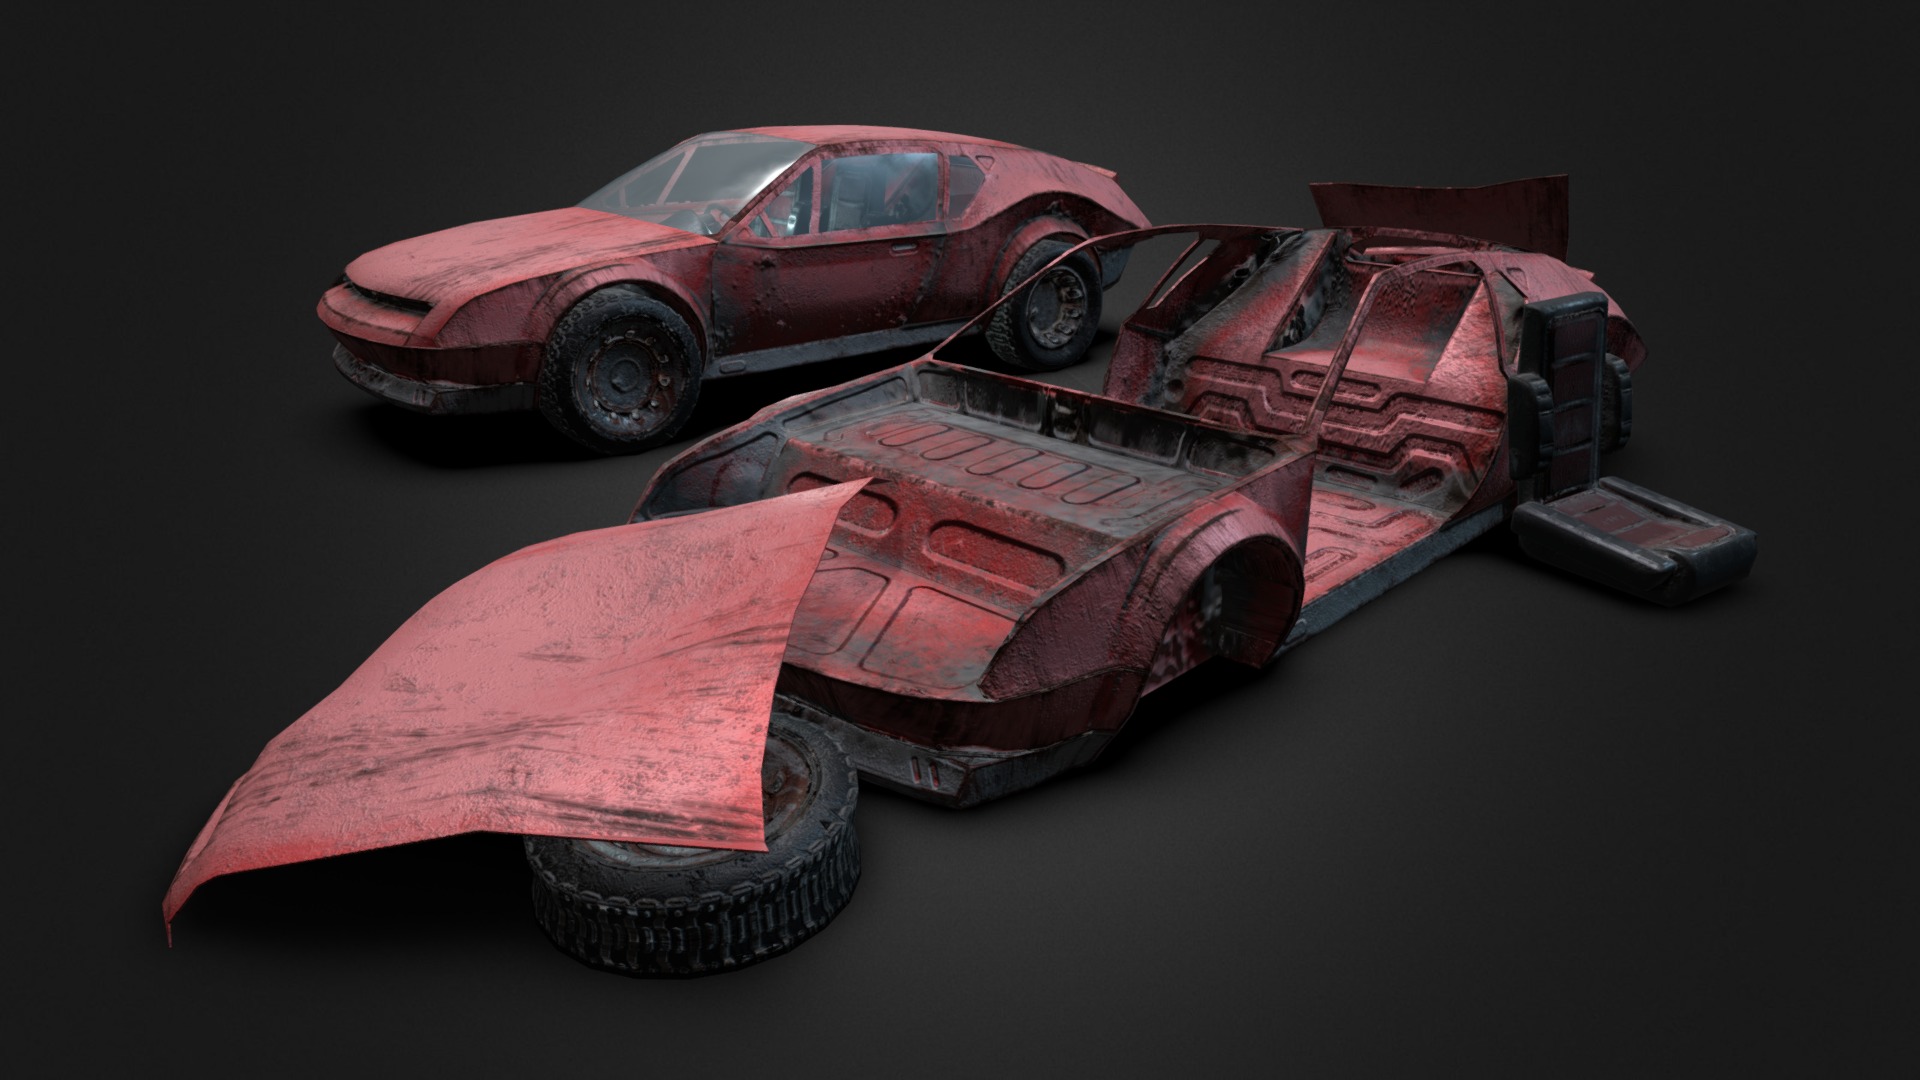 3D model Cyberjunk – supercar - This is a 3D model of the Cyberjunk - supercar. The 3D model is about a toy car and a toy car.